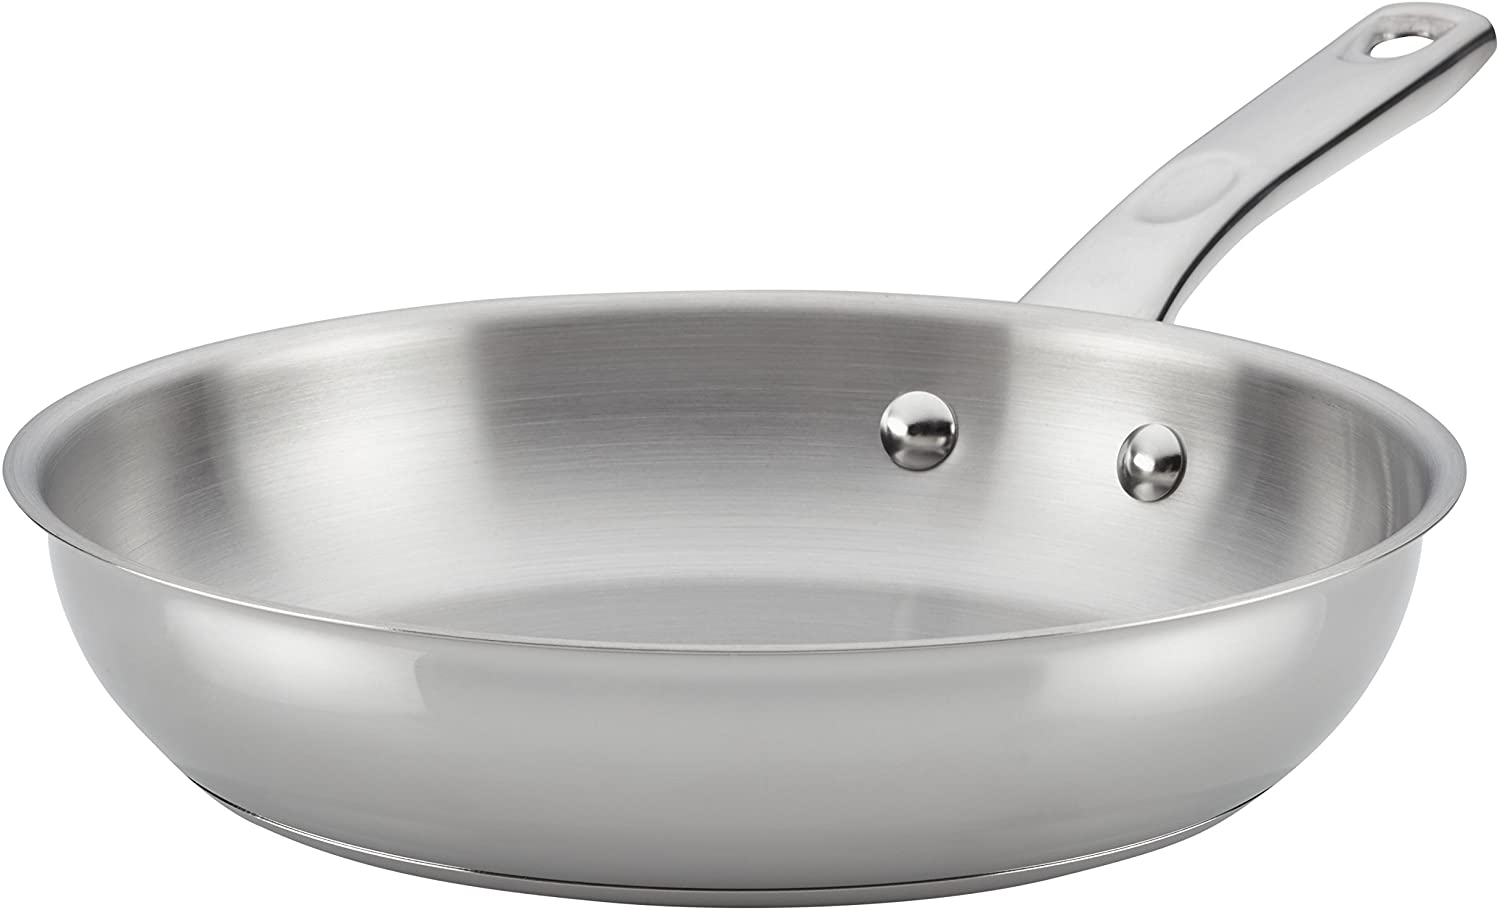 Tramontina Fry Pan Stainless Steel Induction-Ready Tri-Ply Clad 12-Inch  w/Helper Handle, 80116/057DS